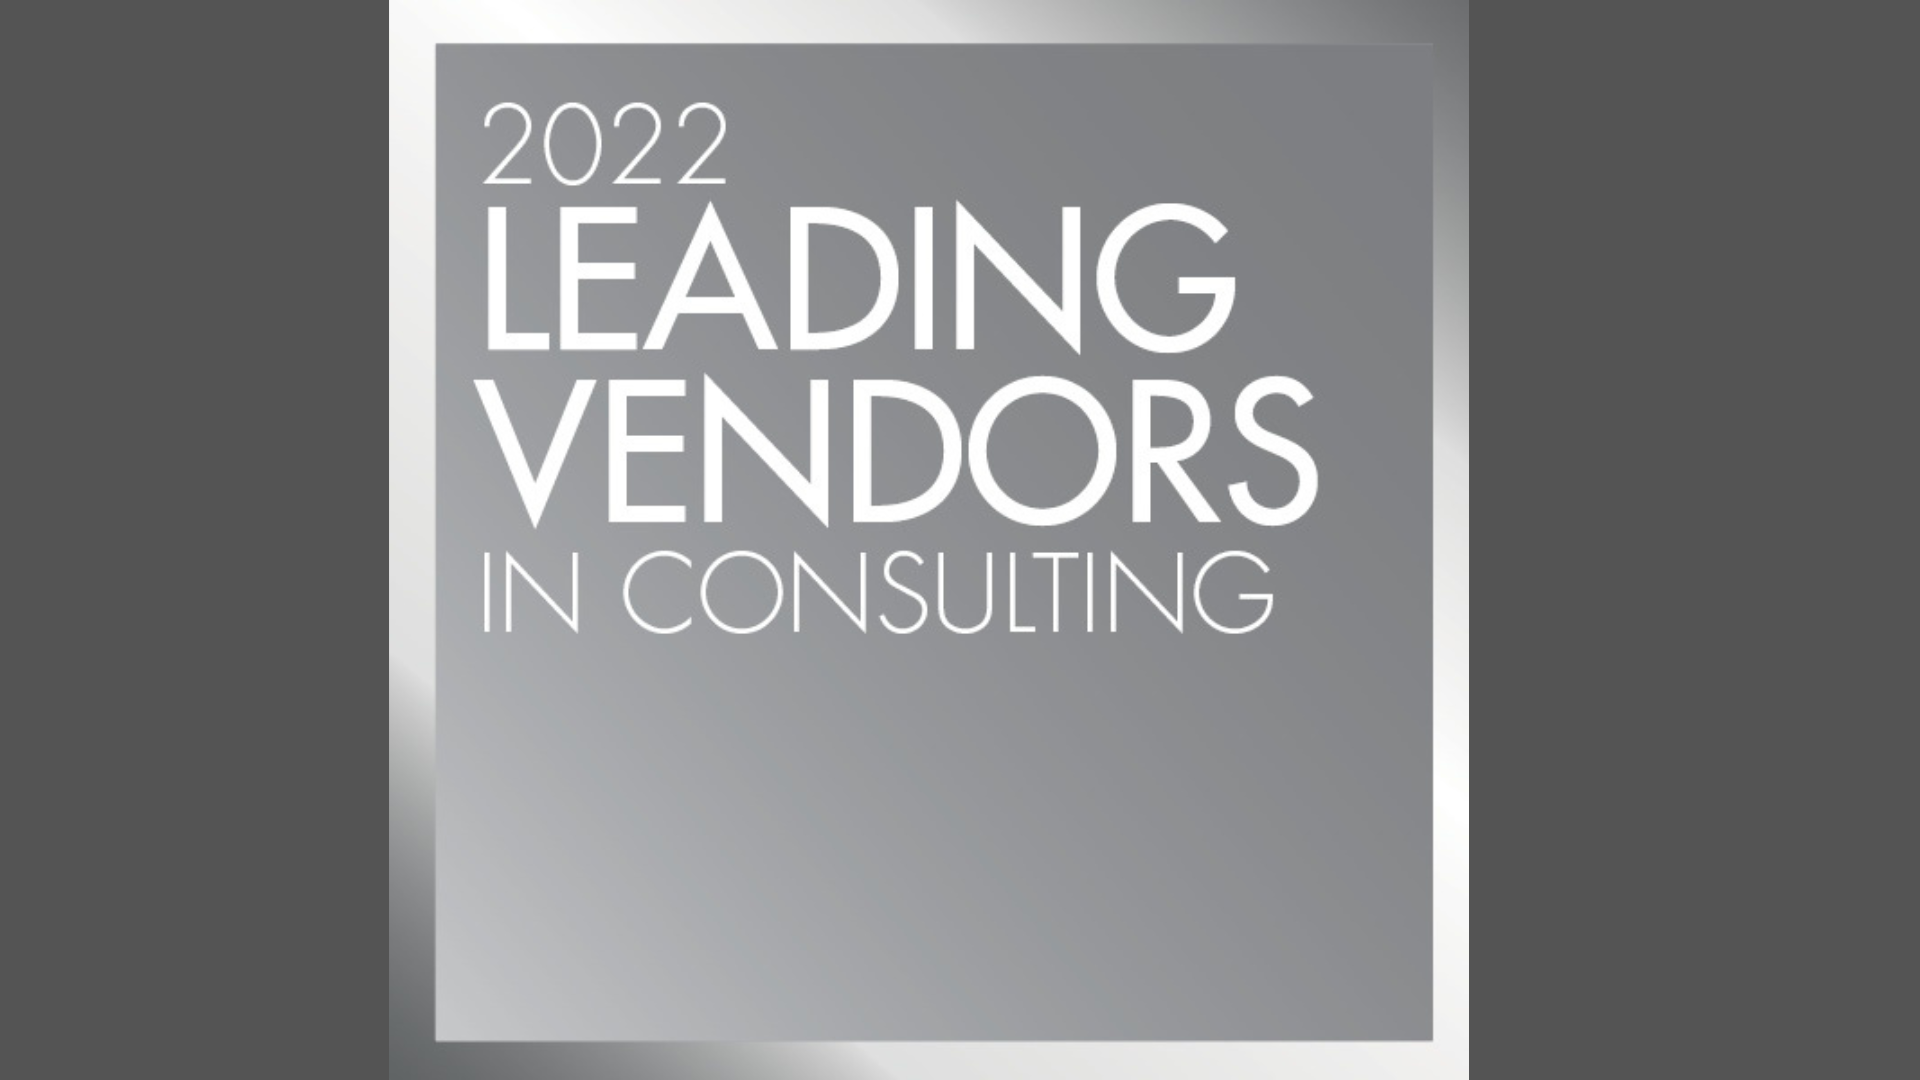 Who Are The Top Providers to the Consulting Services Industry?